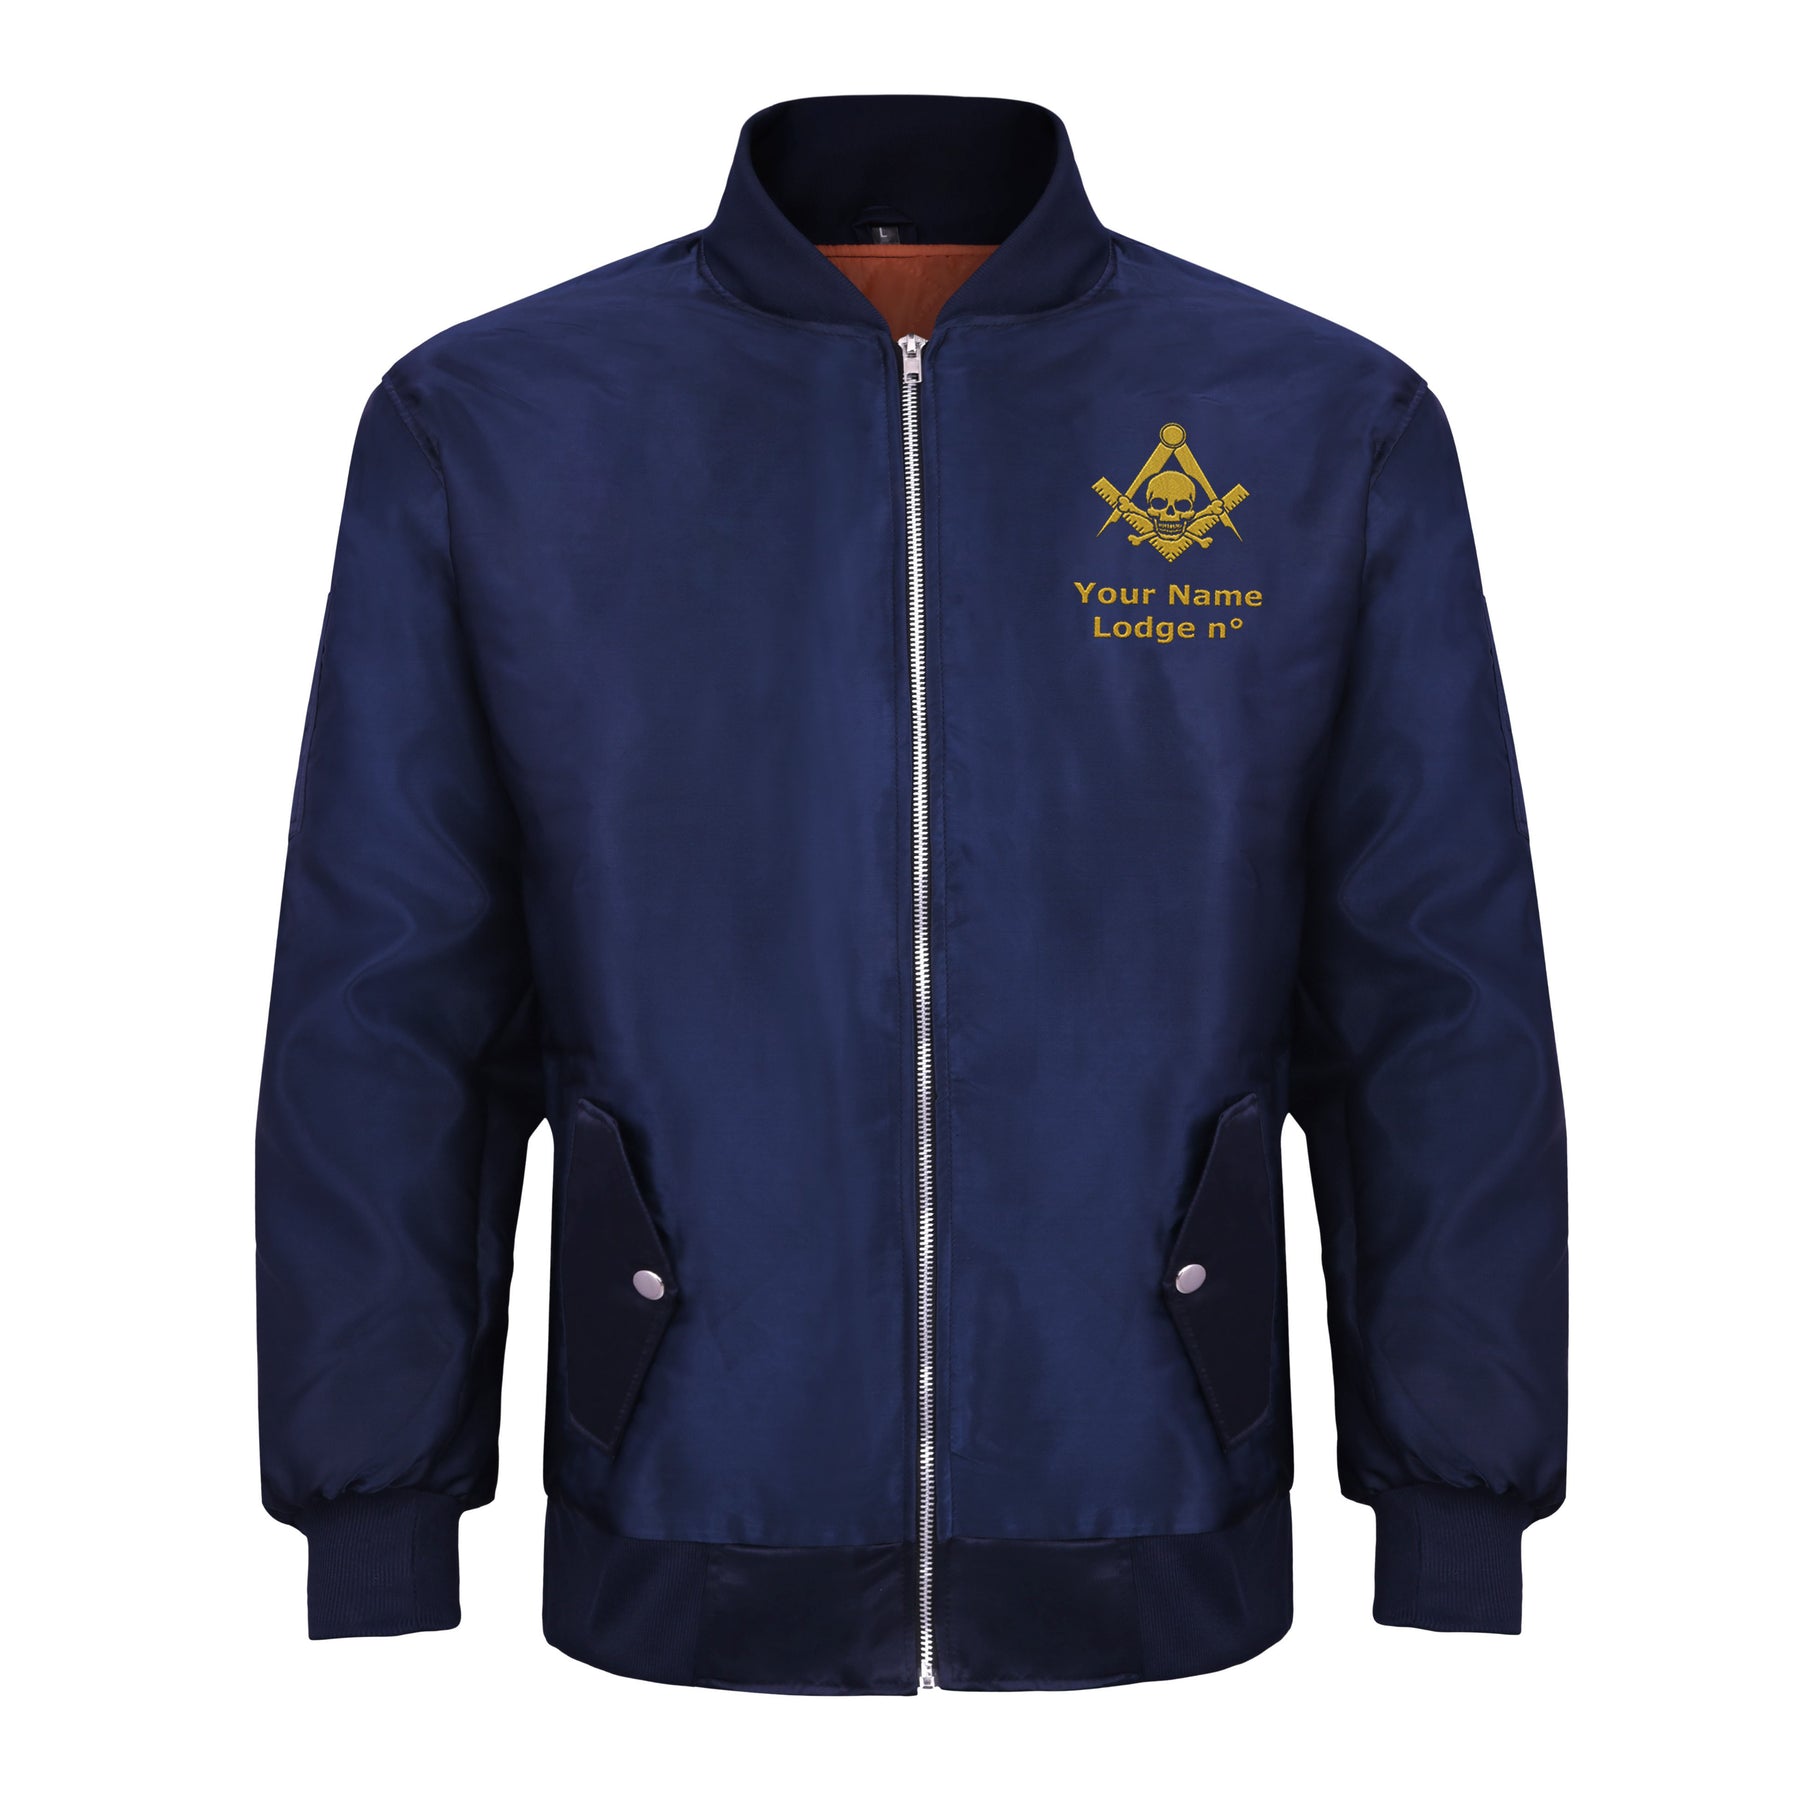 Widows Sons Jacket - Blue Color With Gold Embroidery - Bricks Masons